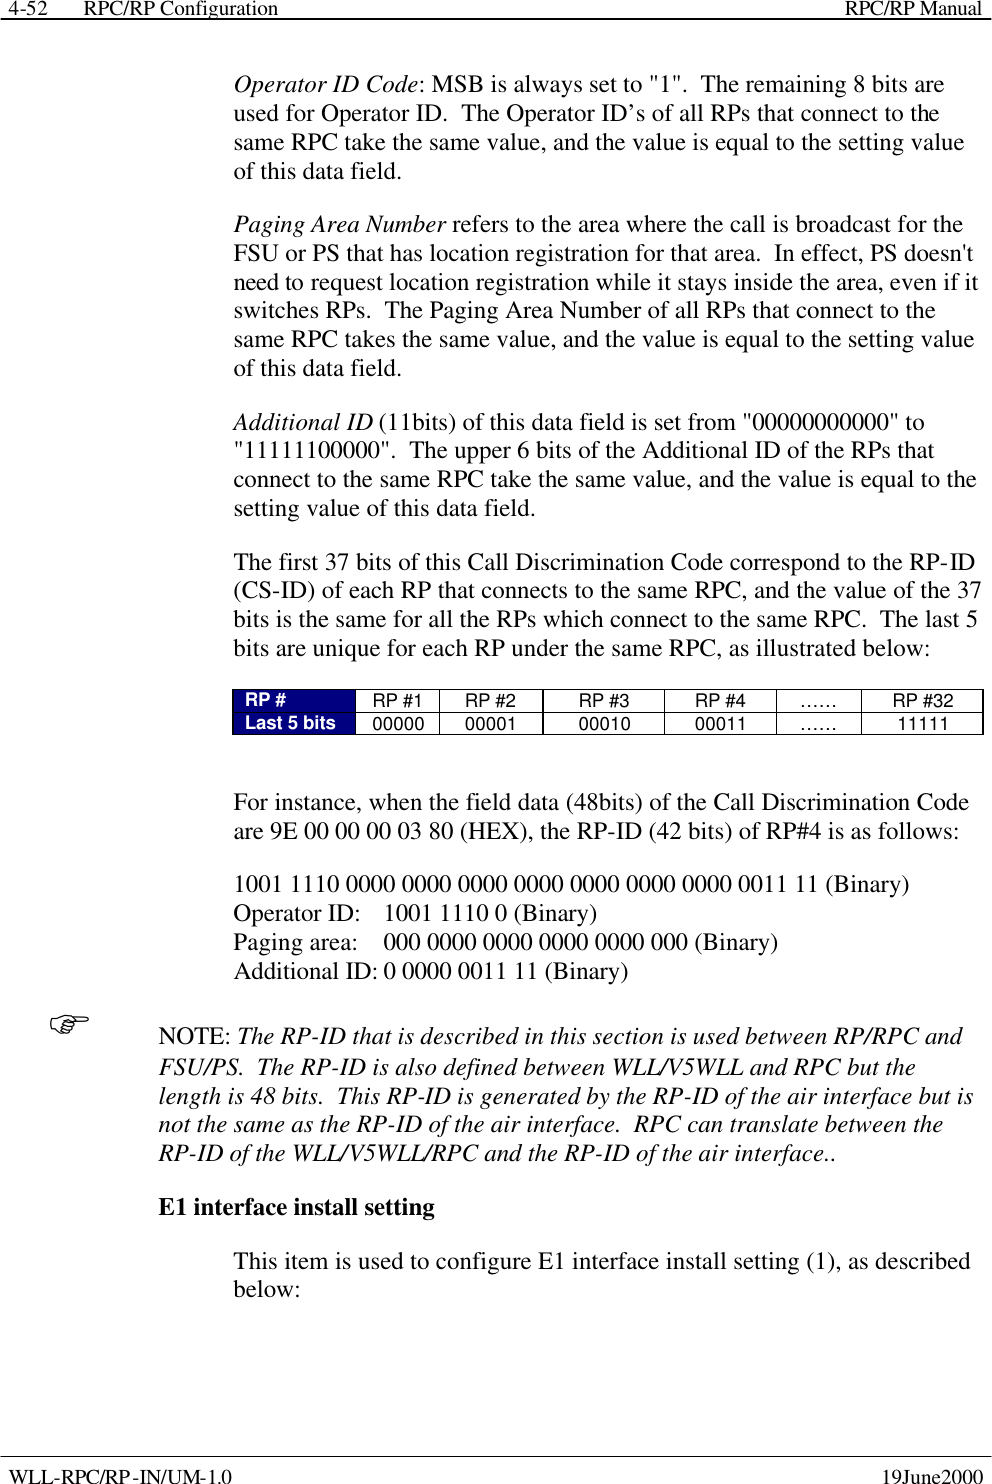  RPC/RP Configuration    RPC/RP Manual   WLL-RPC/RP-IN/UM-1.0    19June2000 4-52Operator ID Code: MSB is always set to &quot;1&quot;.  The remaining 8 bits are used for Operator ID.  The Operator ID’s of all RPs that connect to the same RPC take the same value, and the value is equal to the setting value of this data field. Paging Area Number refers to the area where the call is broadcast for the FSU or PS that has location registration for that area.  In effect, PS doesn&apos;t need to request location registration while it stays inside the area, even if it switches RPs.  The Paging Area Number of all RPs that connect to the same RPC takes the same value, and the value is equal to the setting value of this data field.  Additional ID (11bits) of this data field is set from &quot;00000000000&quot; to  &quot;11111100000&quot;.  The upper 6 bits of the Additional ID of the RPs that connect to the same RPC take the same value, and the value is equal to the setting value of this data field. The first 37 bits of this Call Discrimination Code correspond to the RP-ID (CS-ID) of each RP that connects to the same RPC, and the value of the 37 bits is the same for all the RPs which connect to the same RPC.  The last 5 bits are unique for each RP under the same RPC, as illustrated below: RP # RP #1 RP #2 RP #3 RP #4 …… RP #32 Last 5 bits 00000 00001 00010 00011 …… 11111  For instance, when the field data (48bits) of the Call Discrimination Code are 9E 00 00 00 03 80 (HEX), the RP-ID (42 bits) of RP#4 is as follows: 1001 1110 0000 0000 0000 0000 0000 0000 0000 0011 11 (Binary) Operator ID:  1001 1110 0 (Binary) Paging area:   000 0000 0000 0000 0000 000 (Binary) Additional ID: 0 0000 0011 11 (Binary) F NOTE: The RP-ID that is described in this section is used between RP/RPC and FSU/PS.  The RP-ID is also defined between WLL/V5WLL and RPC but the length is 48 bits.  This RP-ID is generated by the RP-ID of the air interface but is not the same as the RP-ID of the air interface.  RPC can translate between the RP-ID of the WLL/V5WLL/RPC and the RP-ID of the air interface.. E1 interface install setting This item is used to configure E1 interface install setting (1), as described below: 